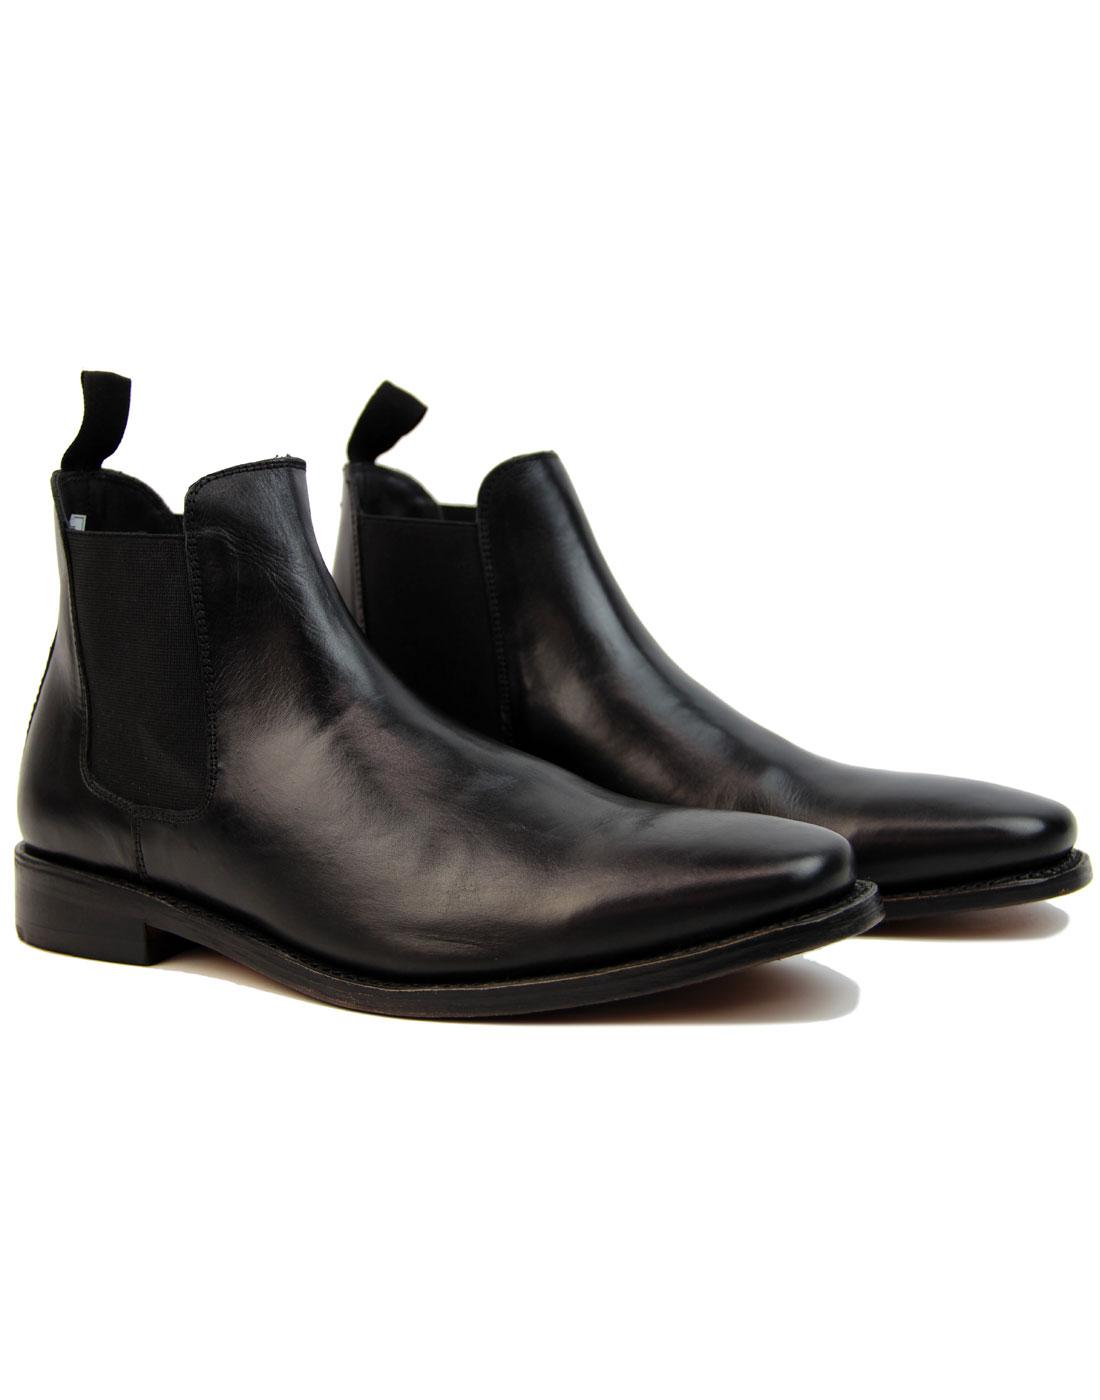 Sloane KENSINGTON Retro Mod Leather Goodyear Welted Chelsea Boots